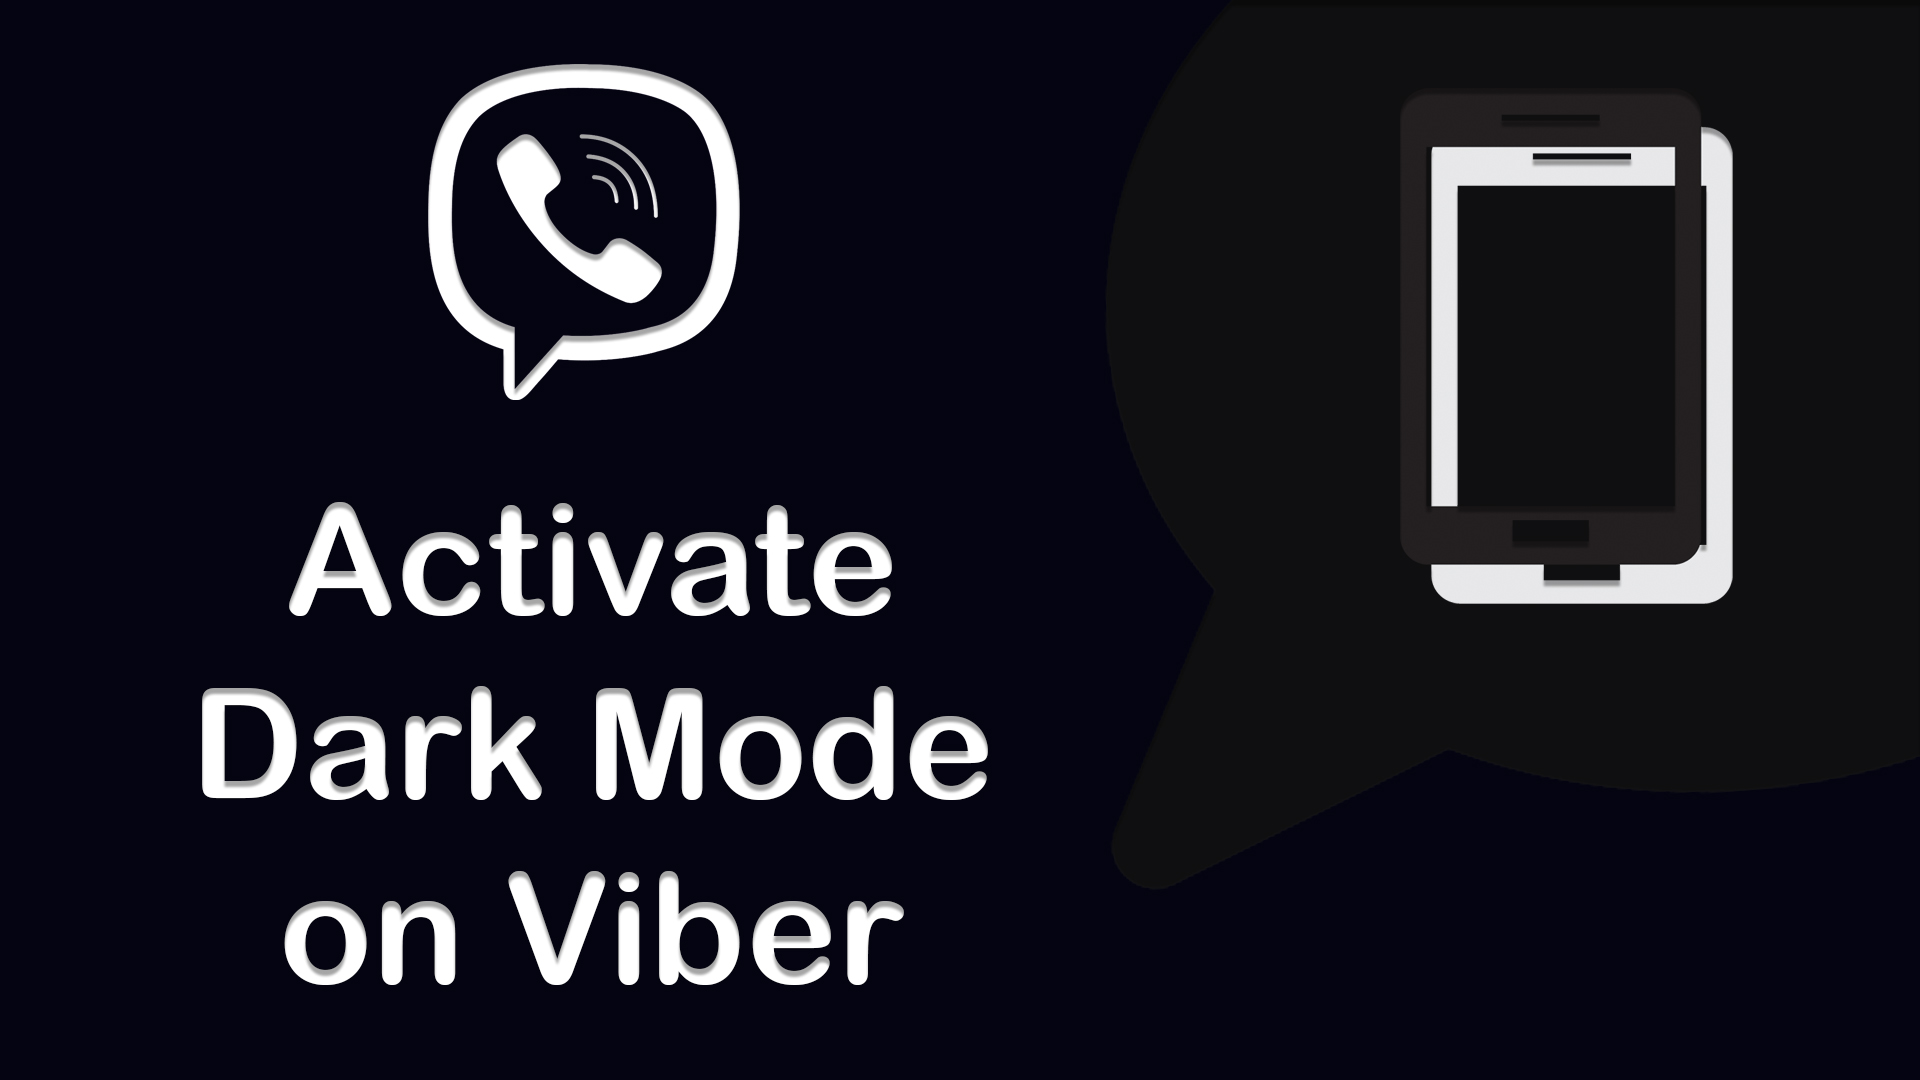 How to Activate Dark Mode on Viber